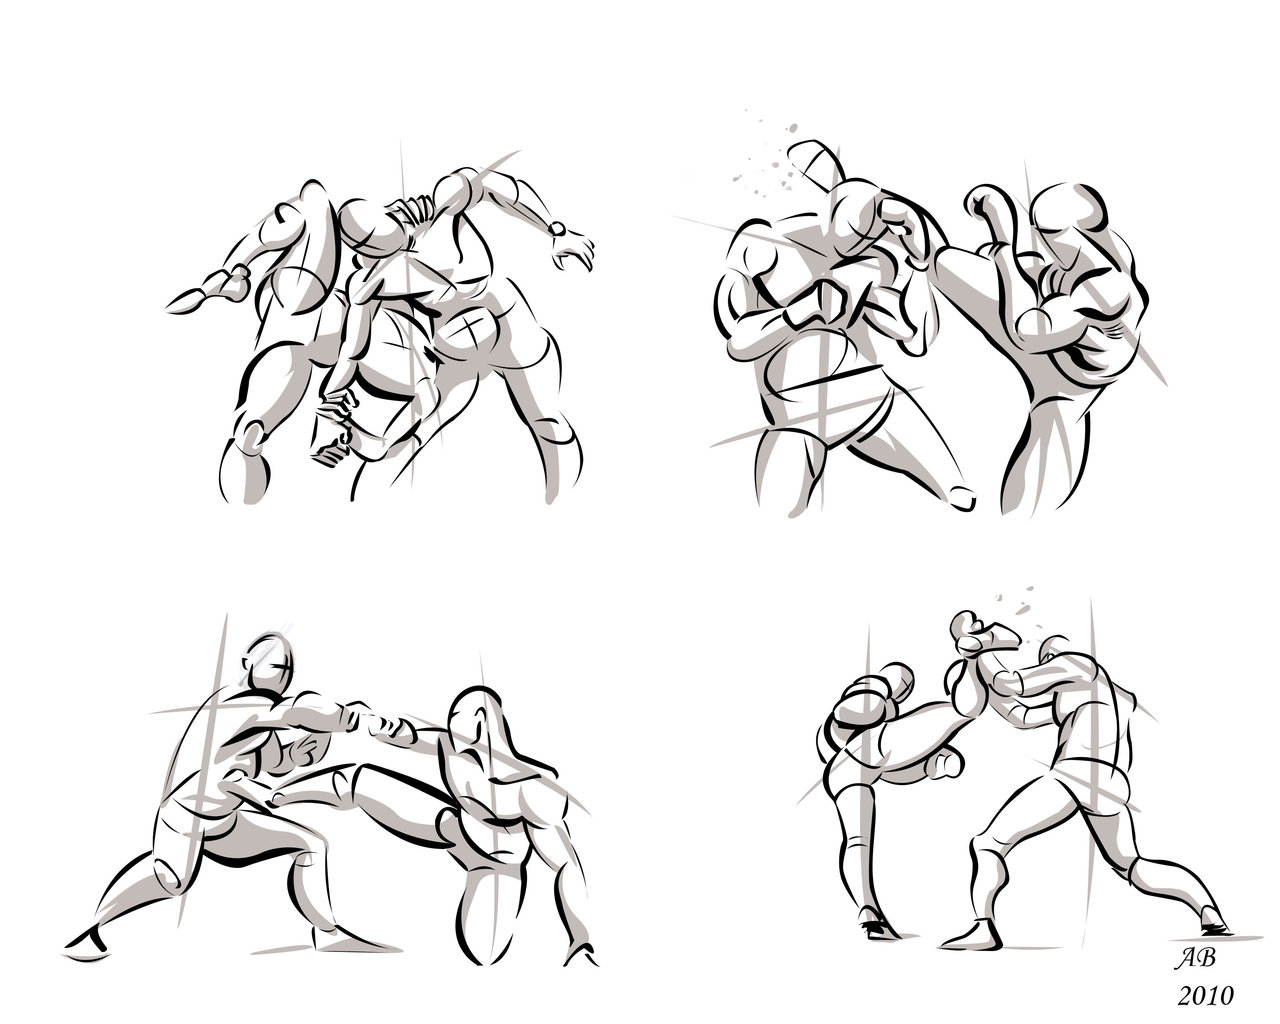 Sitting around doodling working on drawing some semi dynamic poses from  imagination I got a long way to go but I can see some progress he... |  Instagram